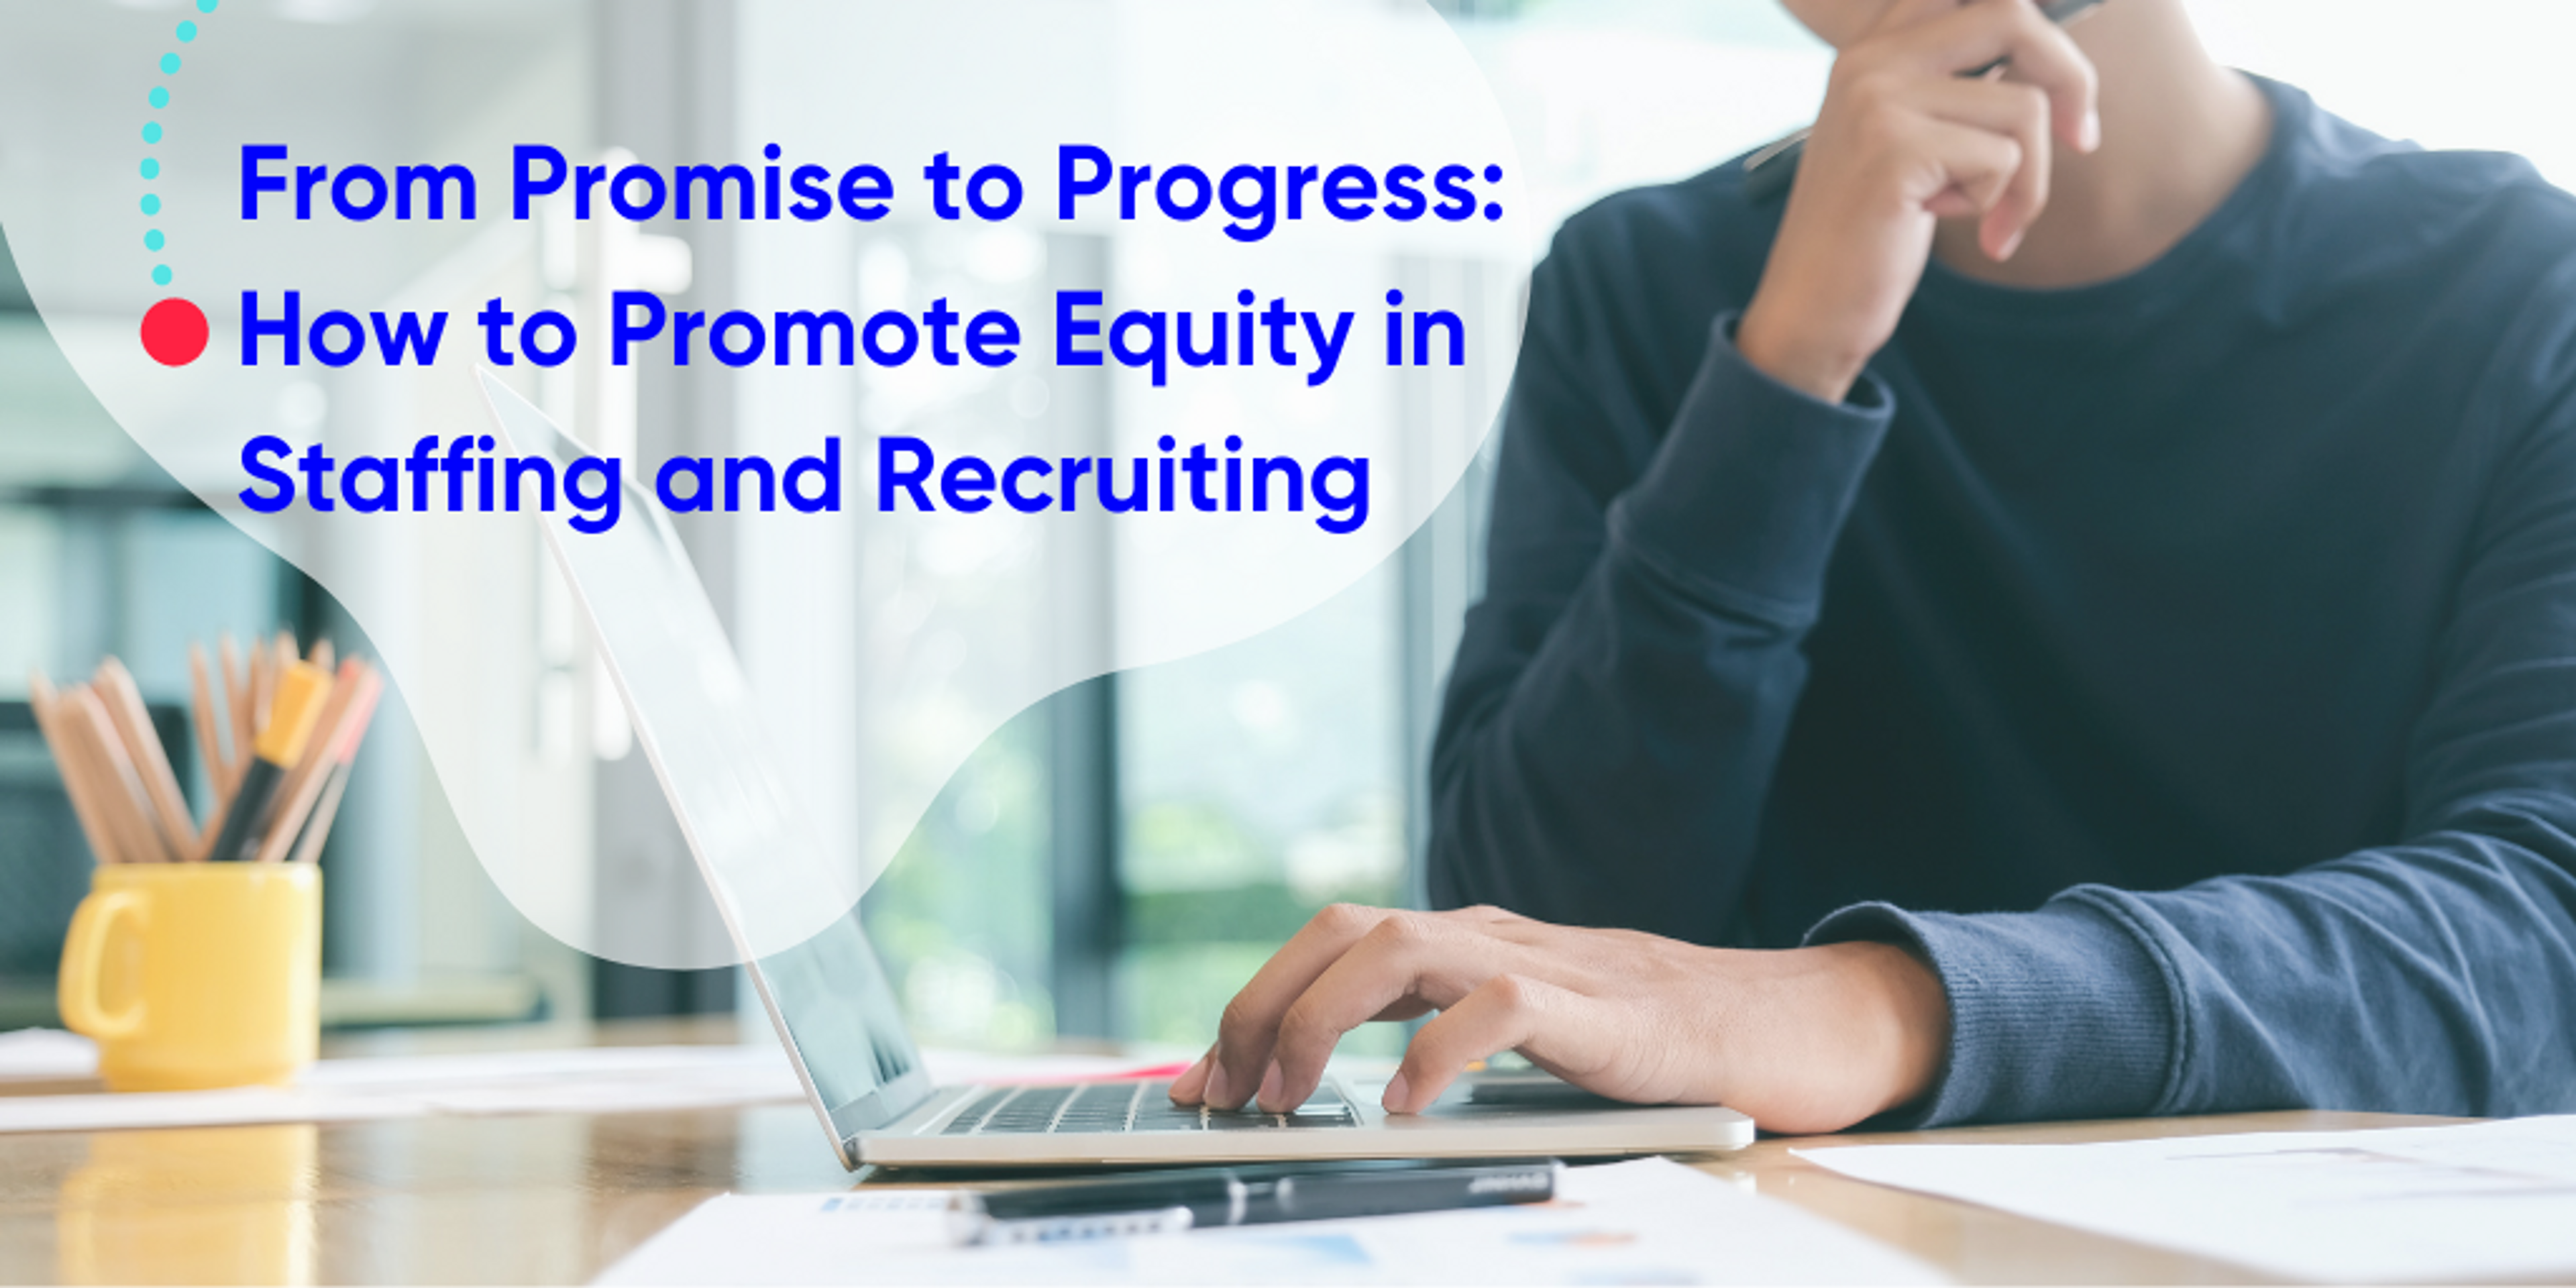 Image of someone thinking at their laptop with text "From Promise to Progress: How to Promote Equity in Staffing and Recruiting"